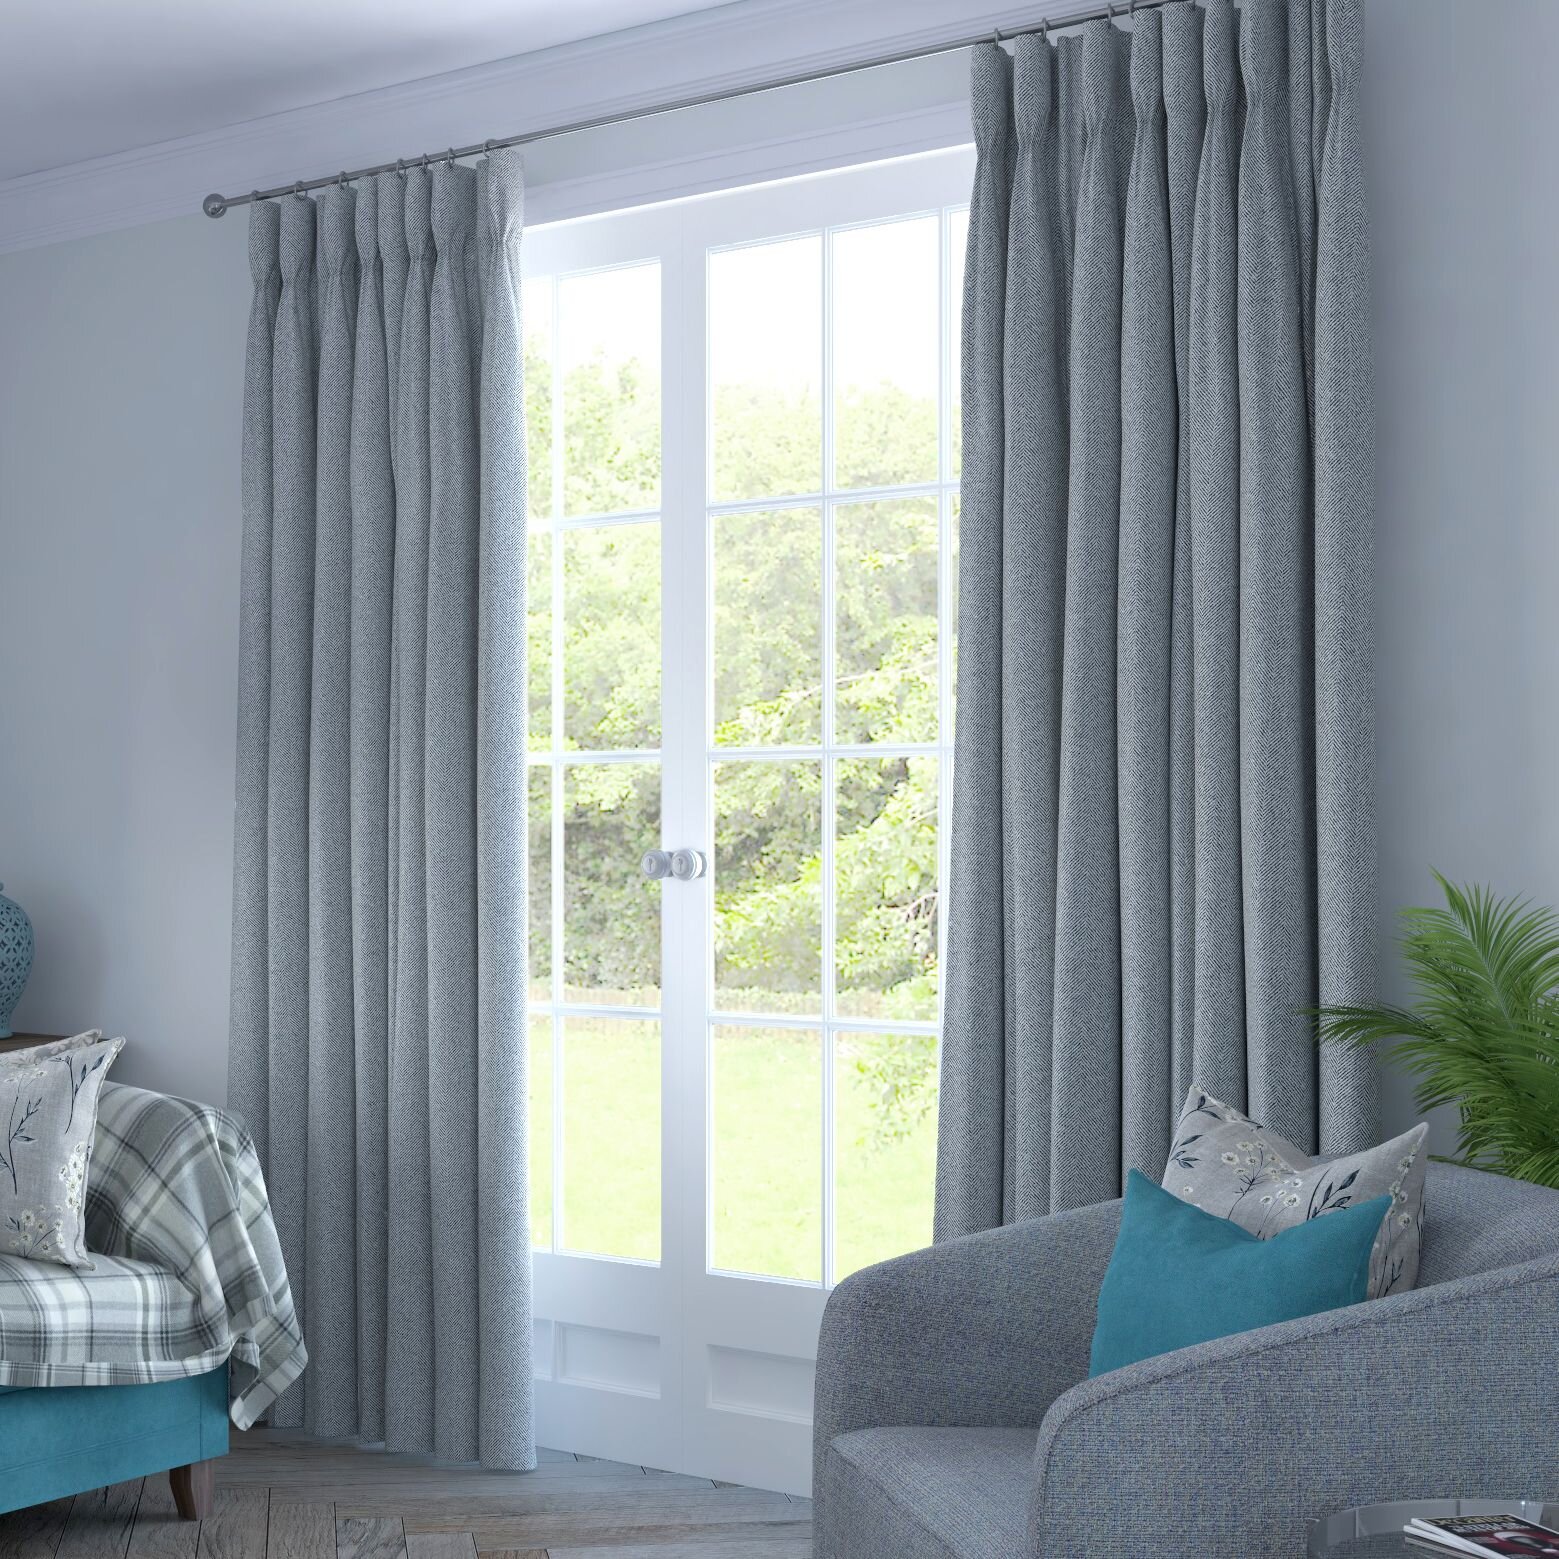 UK Thermal Eyelet Solid Blackout Drapes Window Curtain Living Room Bedroom Decor 